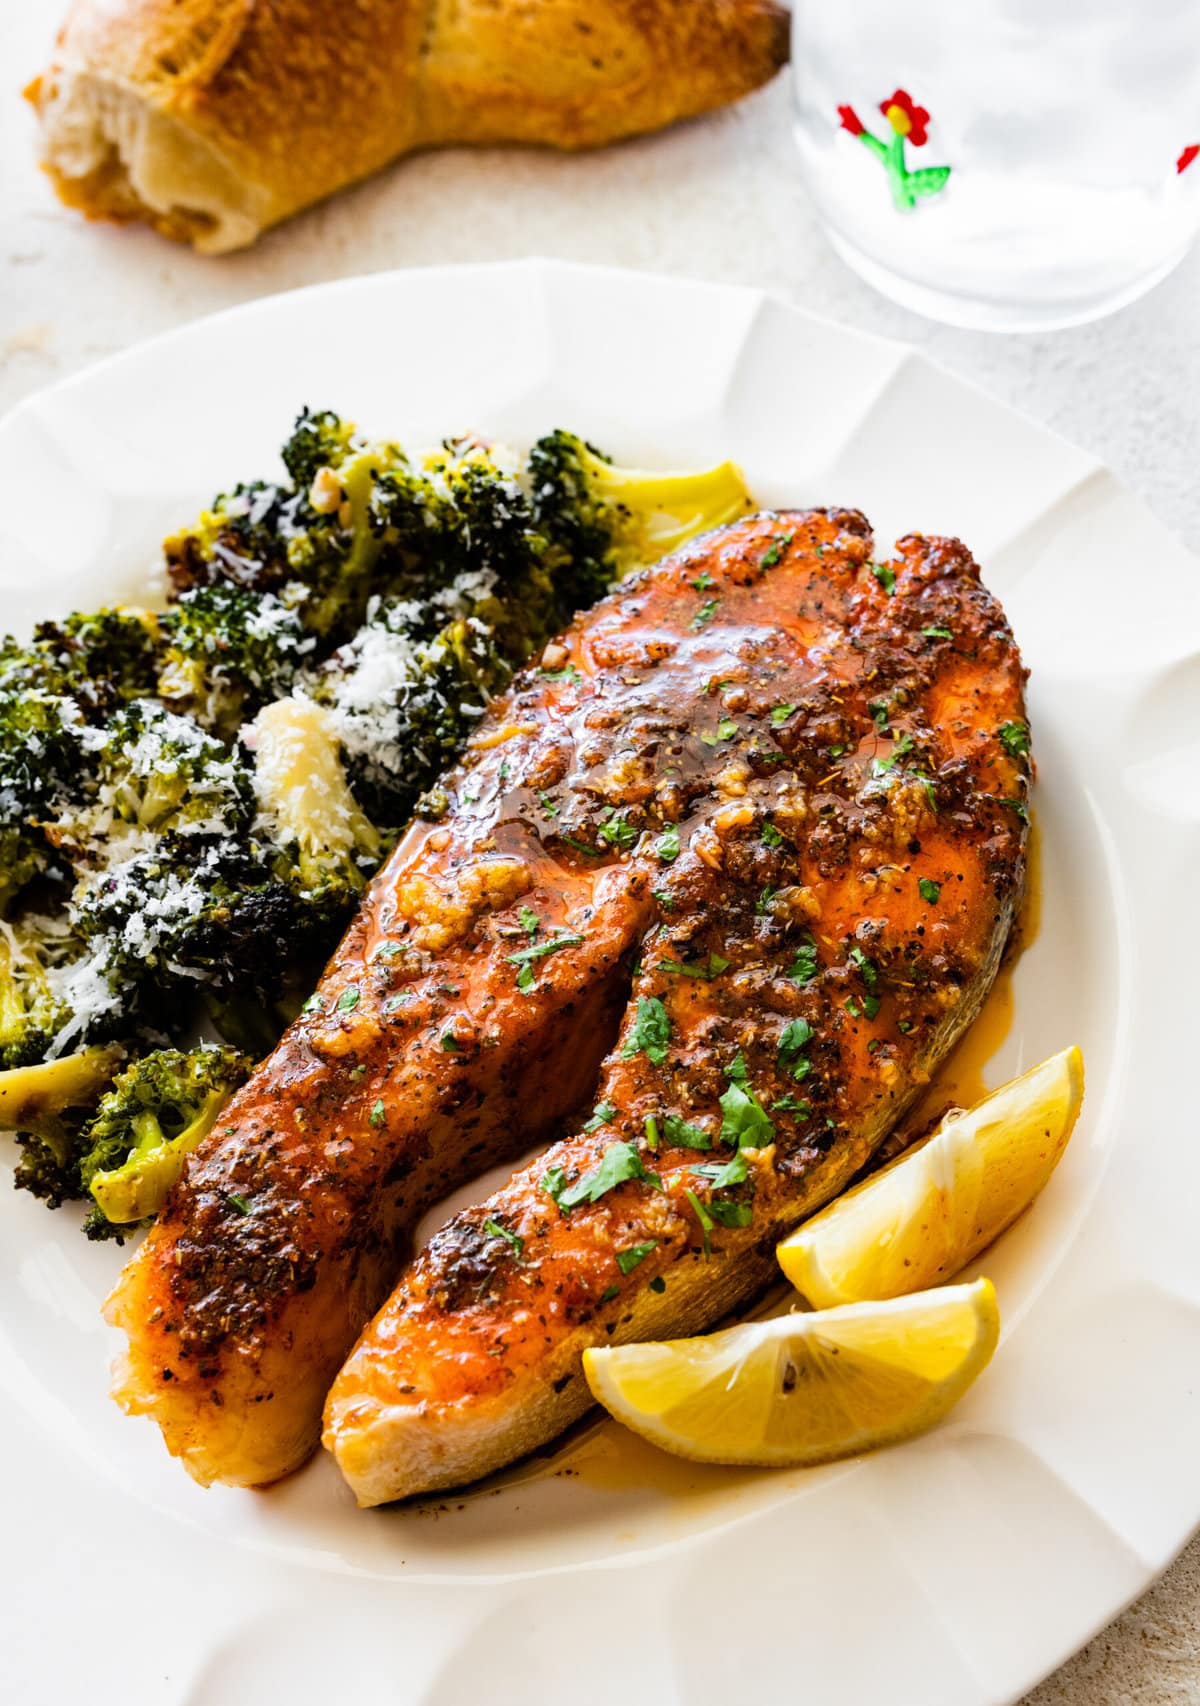 A plate with the easy oven baked salmon steaks recipe with roasted broccoli on the side.